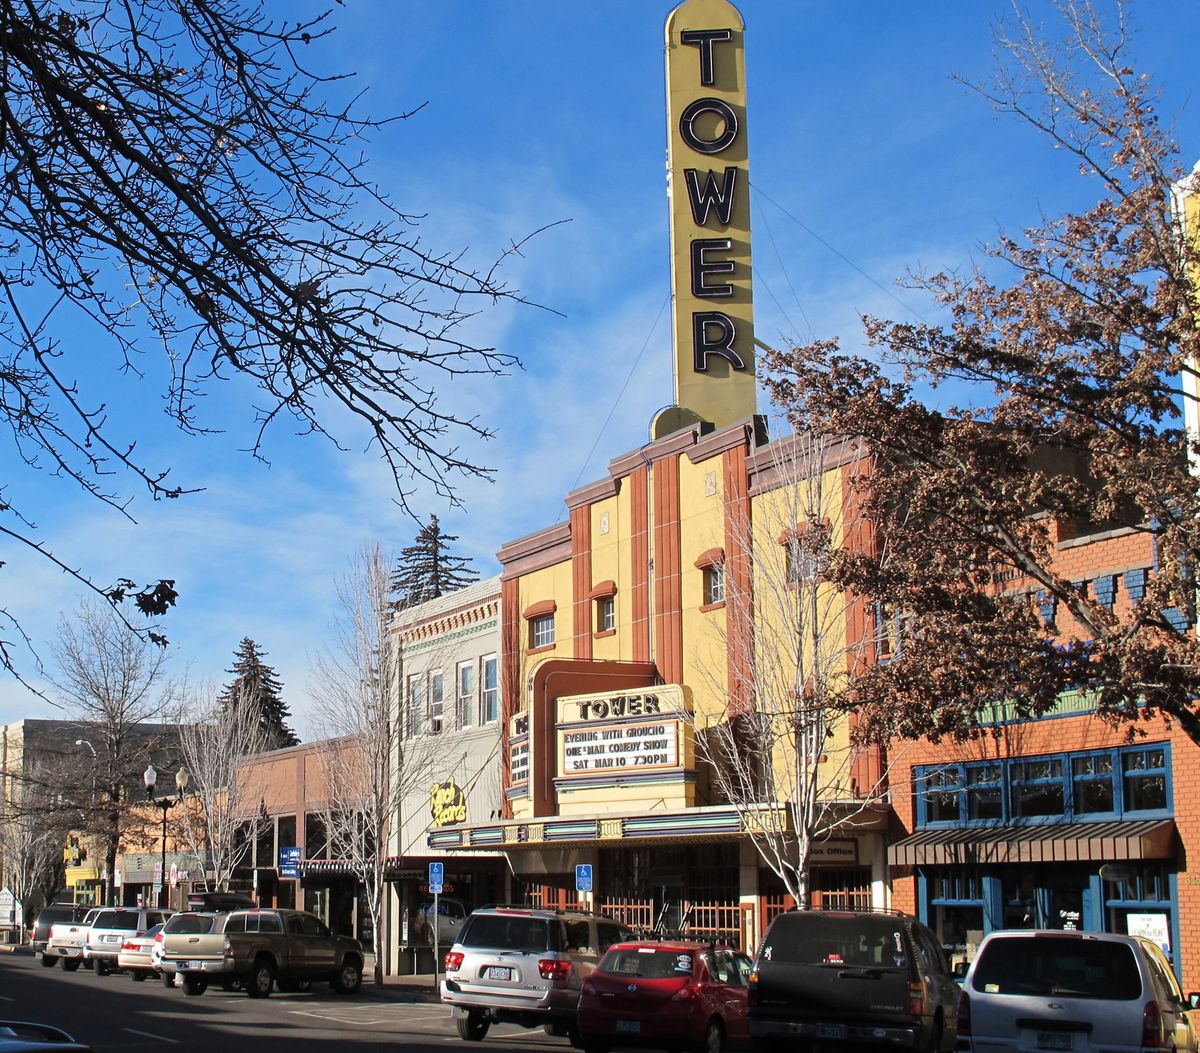 The 72-year-old Tower Theatre, renovated in 2004, is a landmark in downtown Bend, Ore.